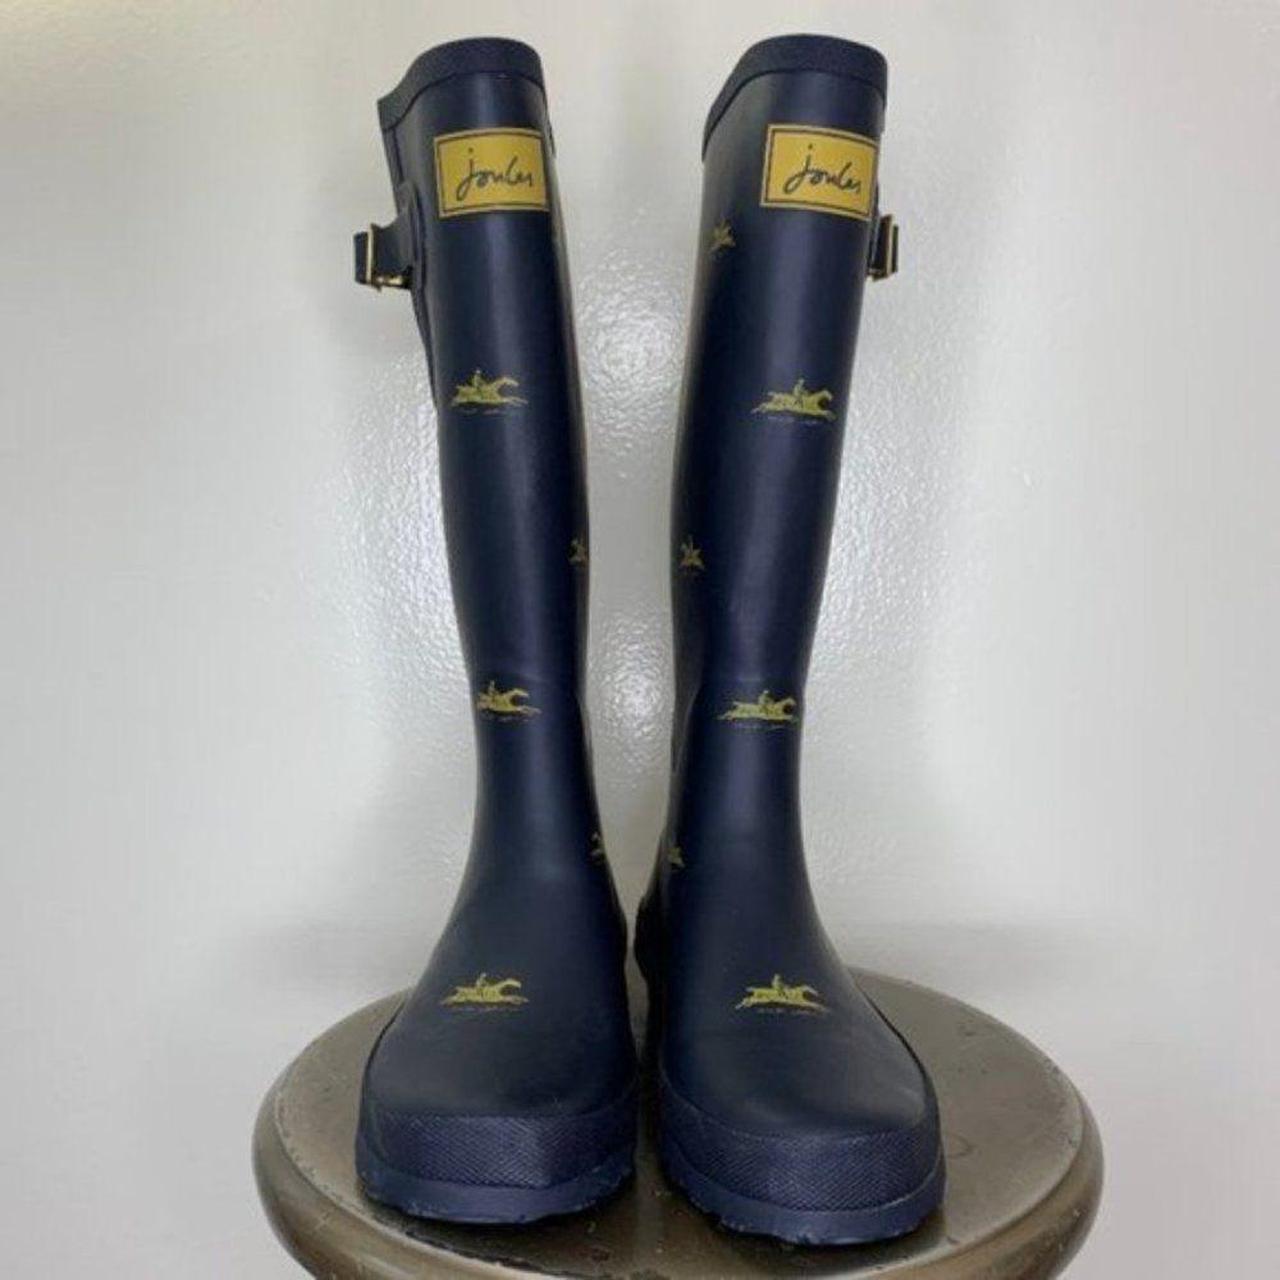 Joules Women's Blue and Yellow Boots (2)